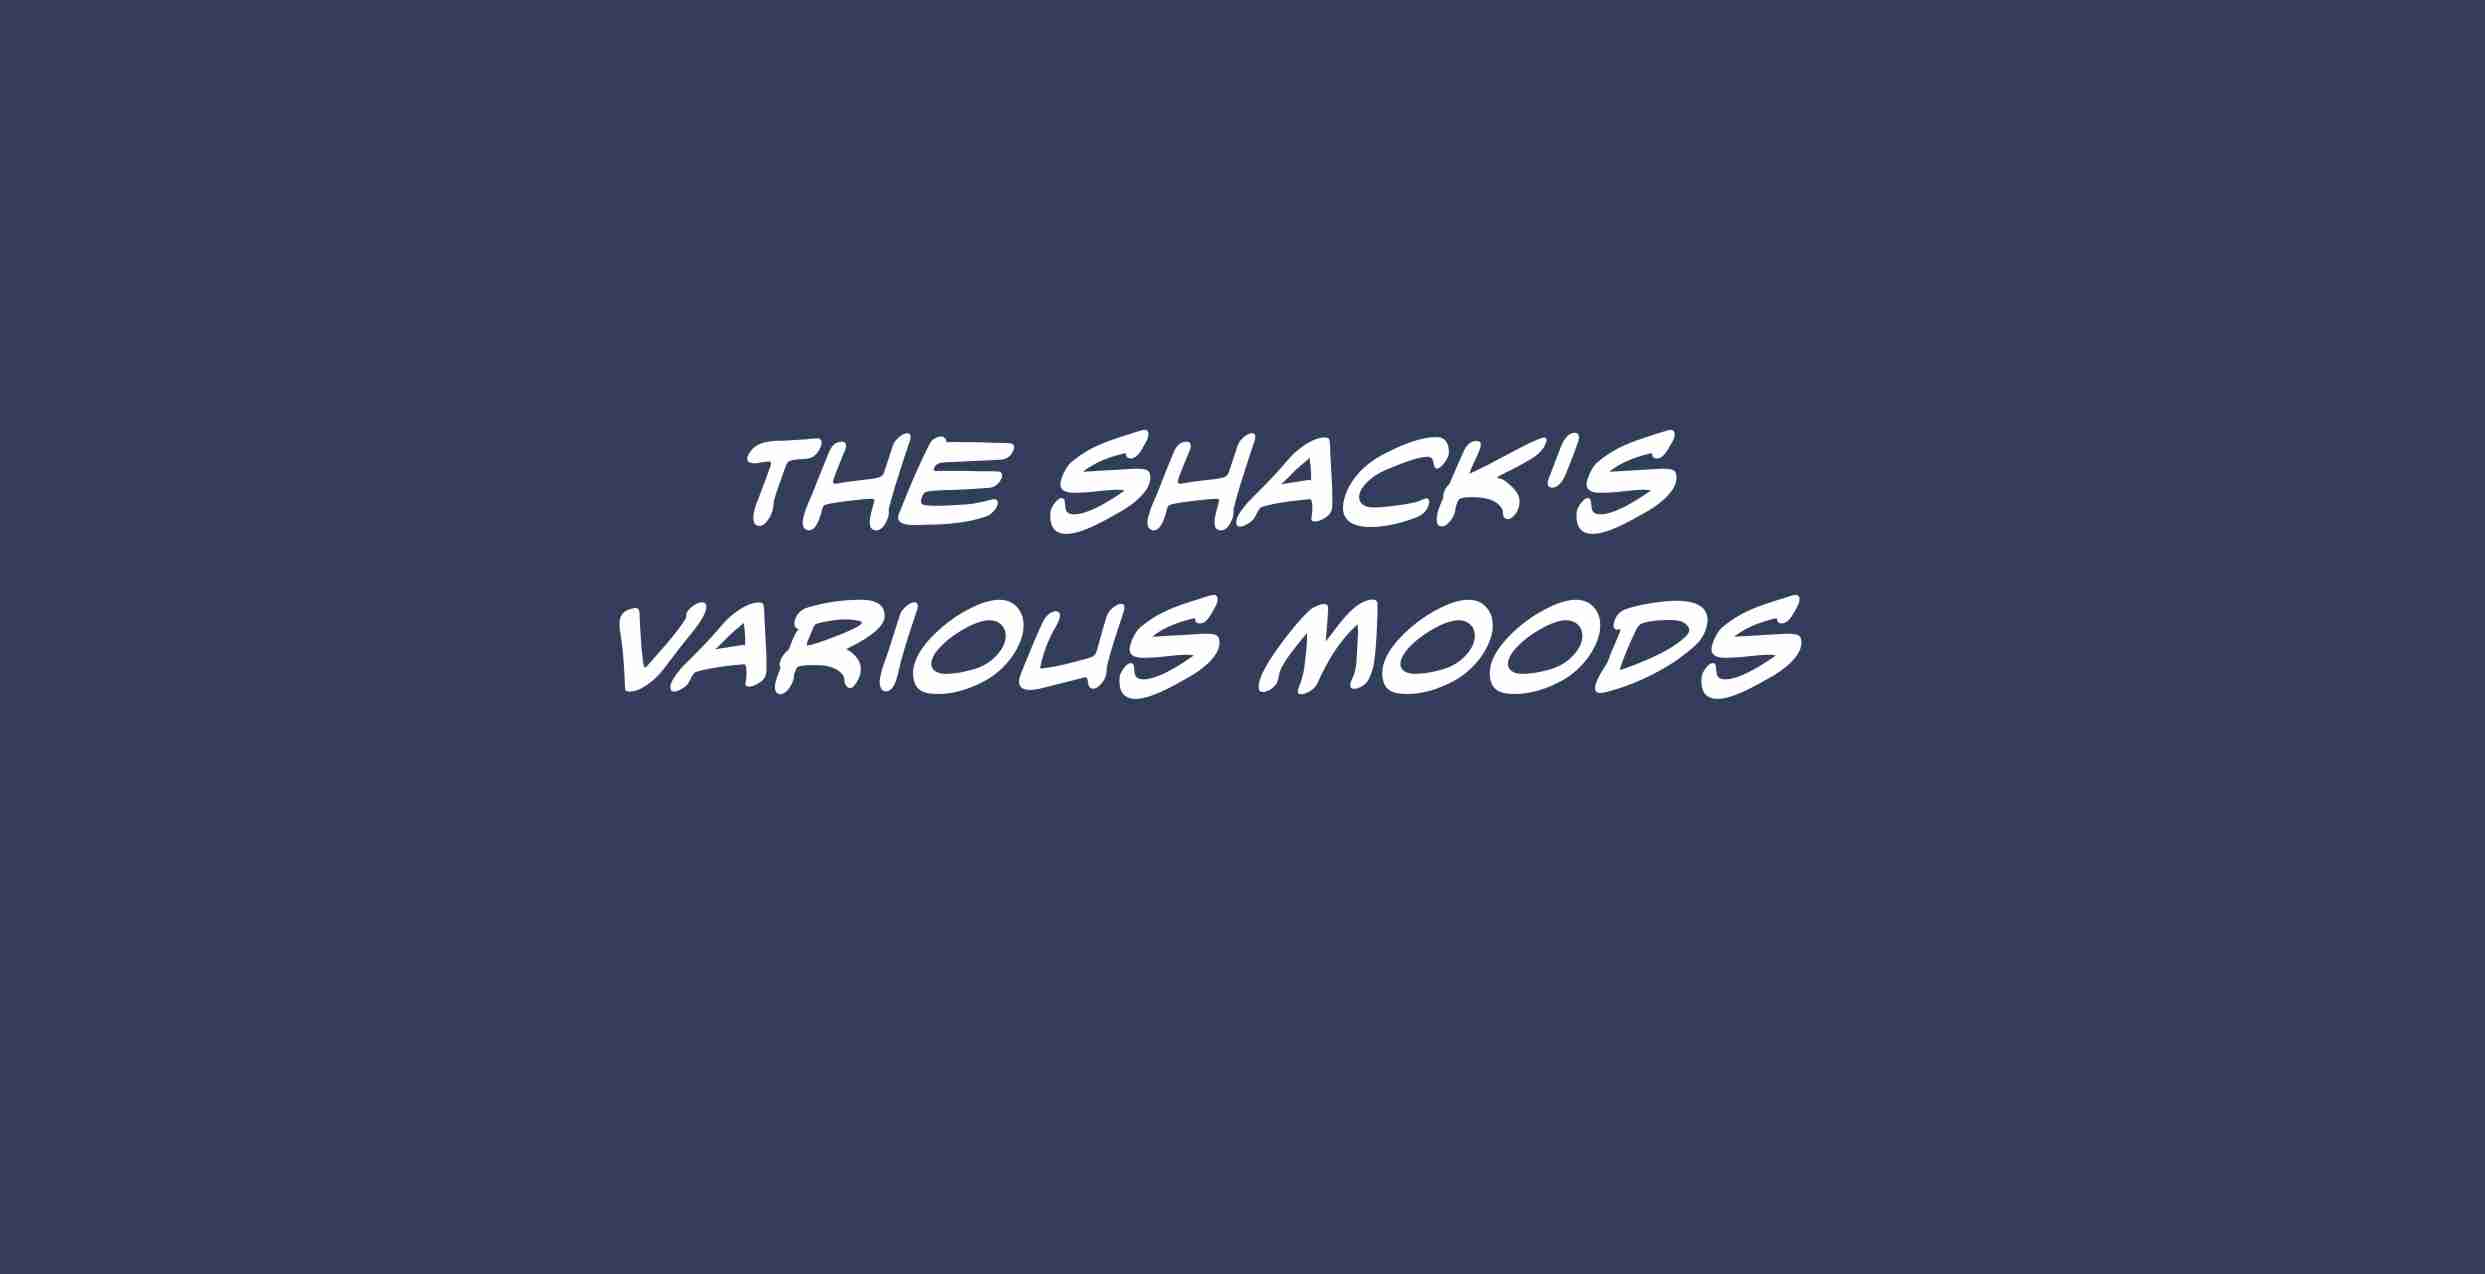 The shack in its various moods